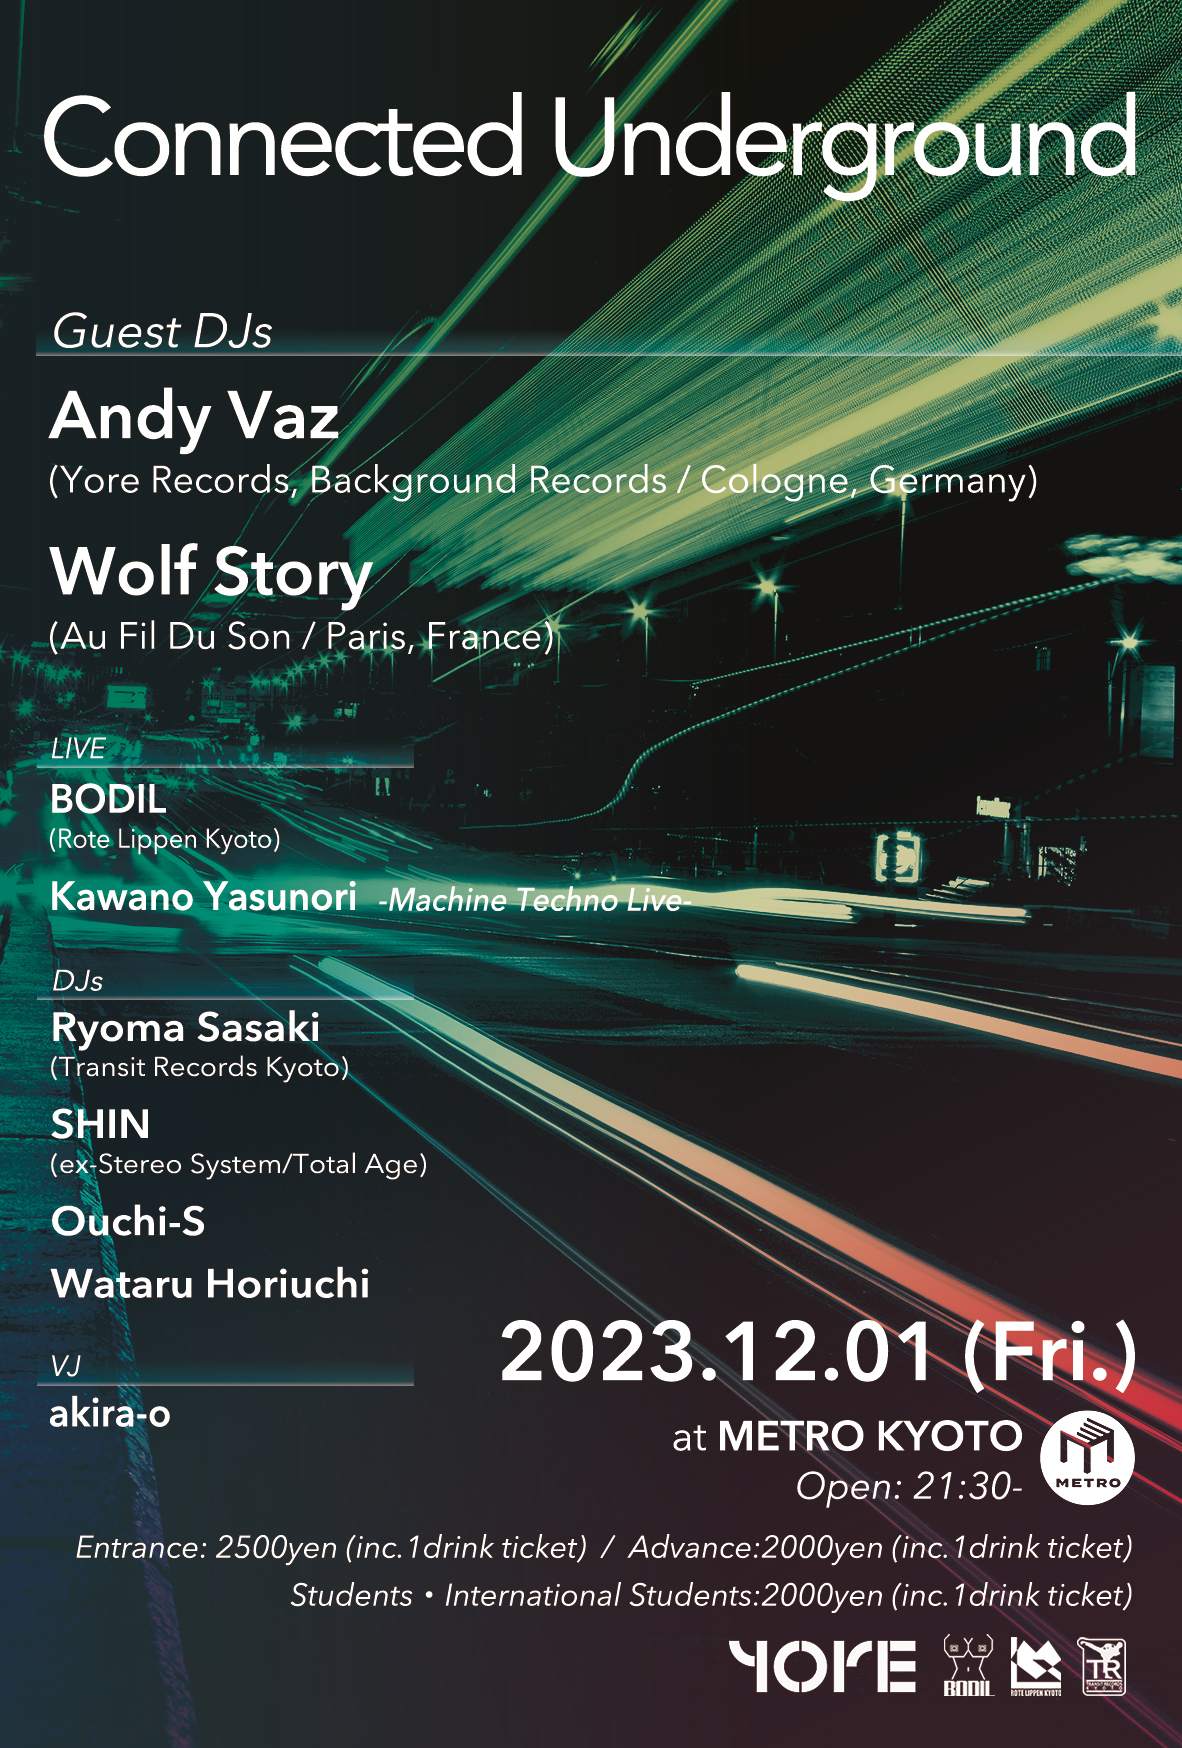 Connected Underground with Andy Vaz (Yore Records/ Cologne), Wolf Story (Au Fil Du Son/ Paris) - フライヤー表